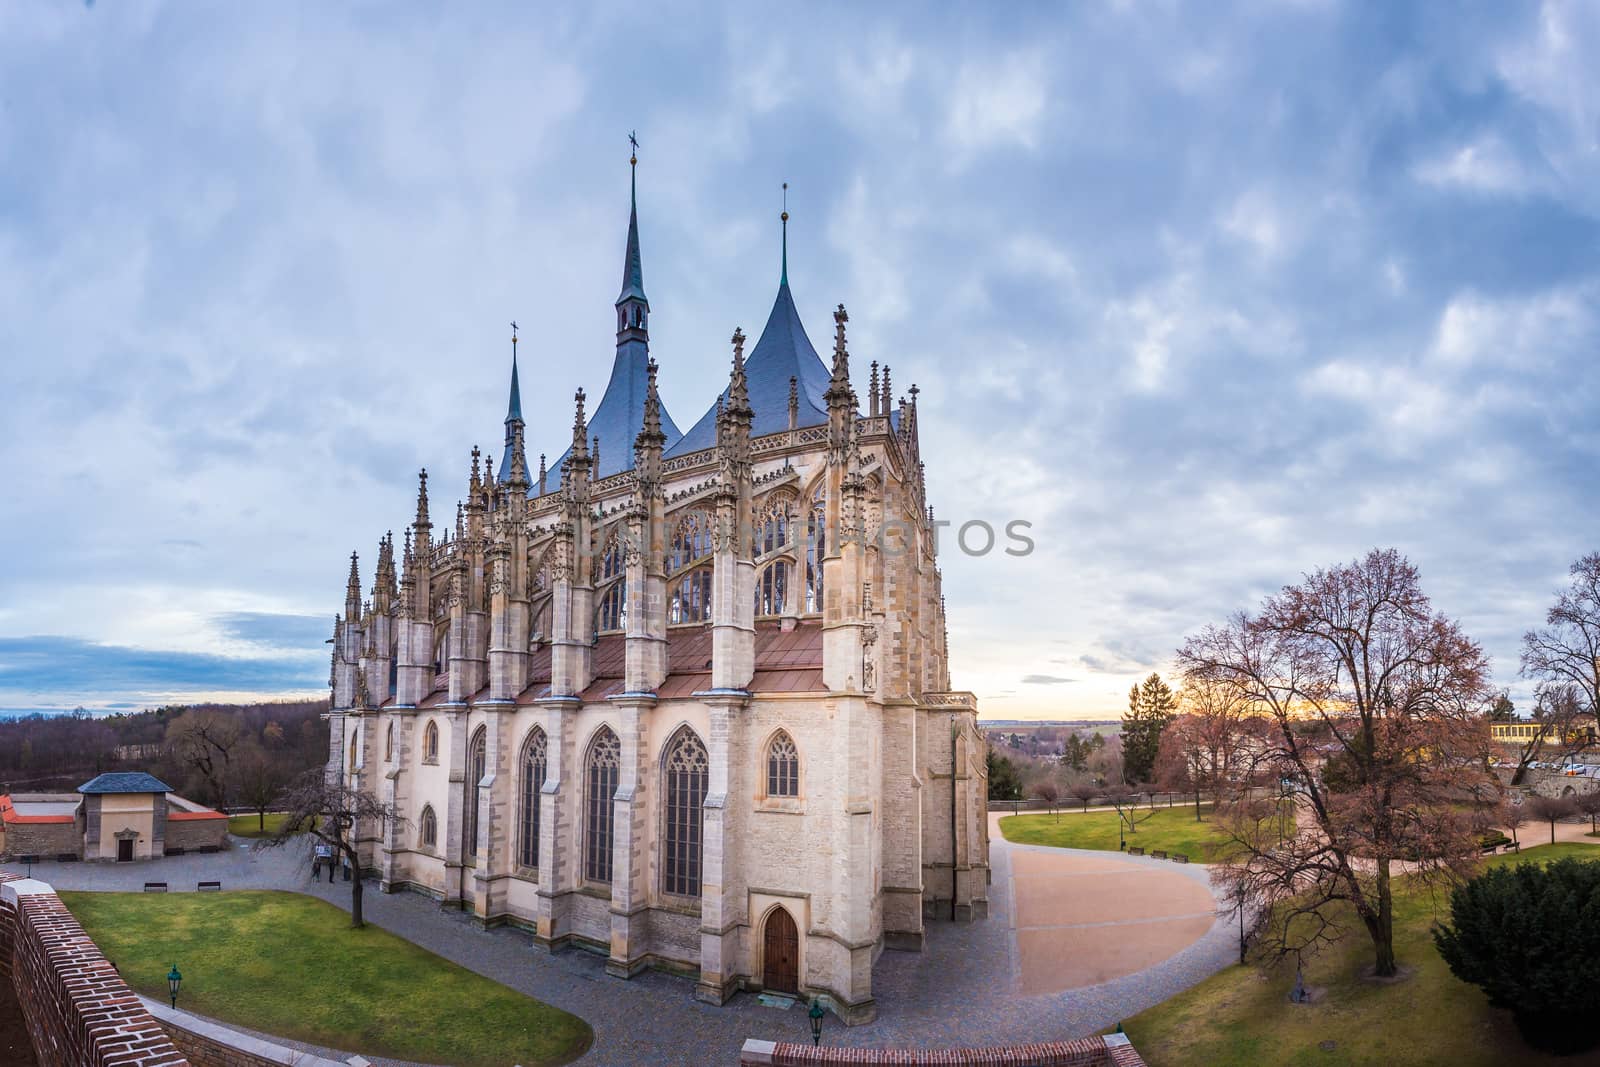 St. Barbara cathedral in Kutna Hora, jewel of Gothic architecture and art of Czech Republic. Kutna Hora is UNESCO World Heritage Site. Winter time at sunset. by petrsvoboda91